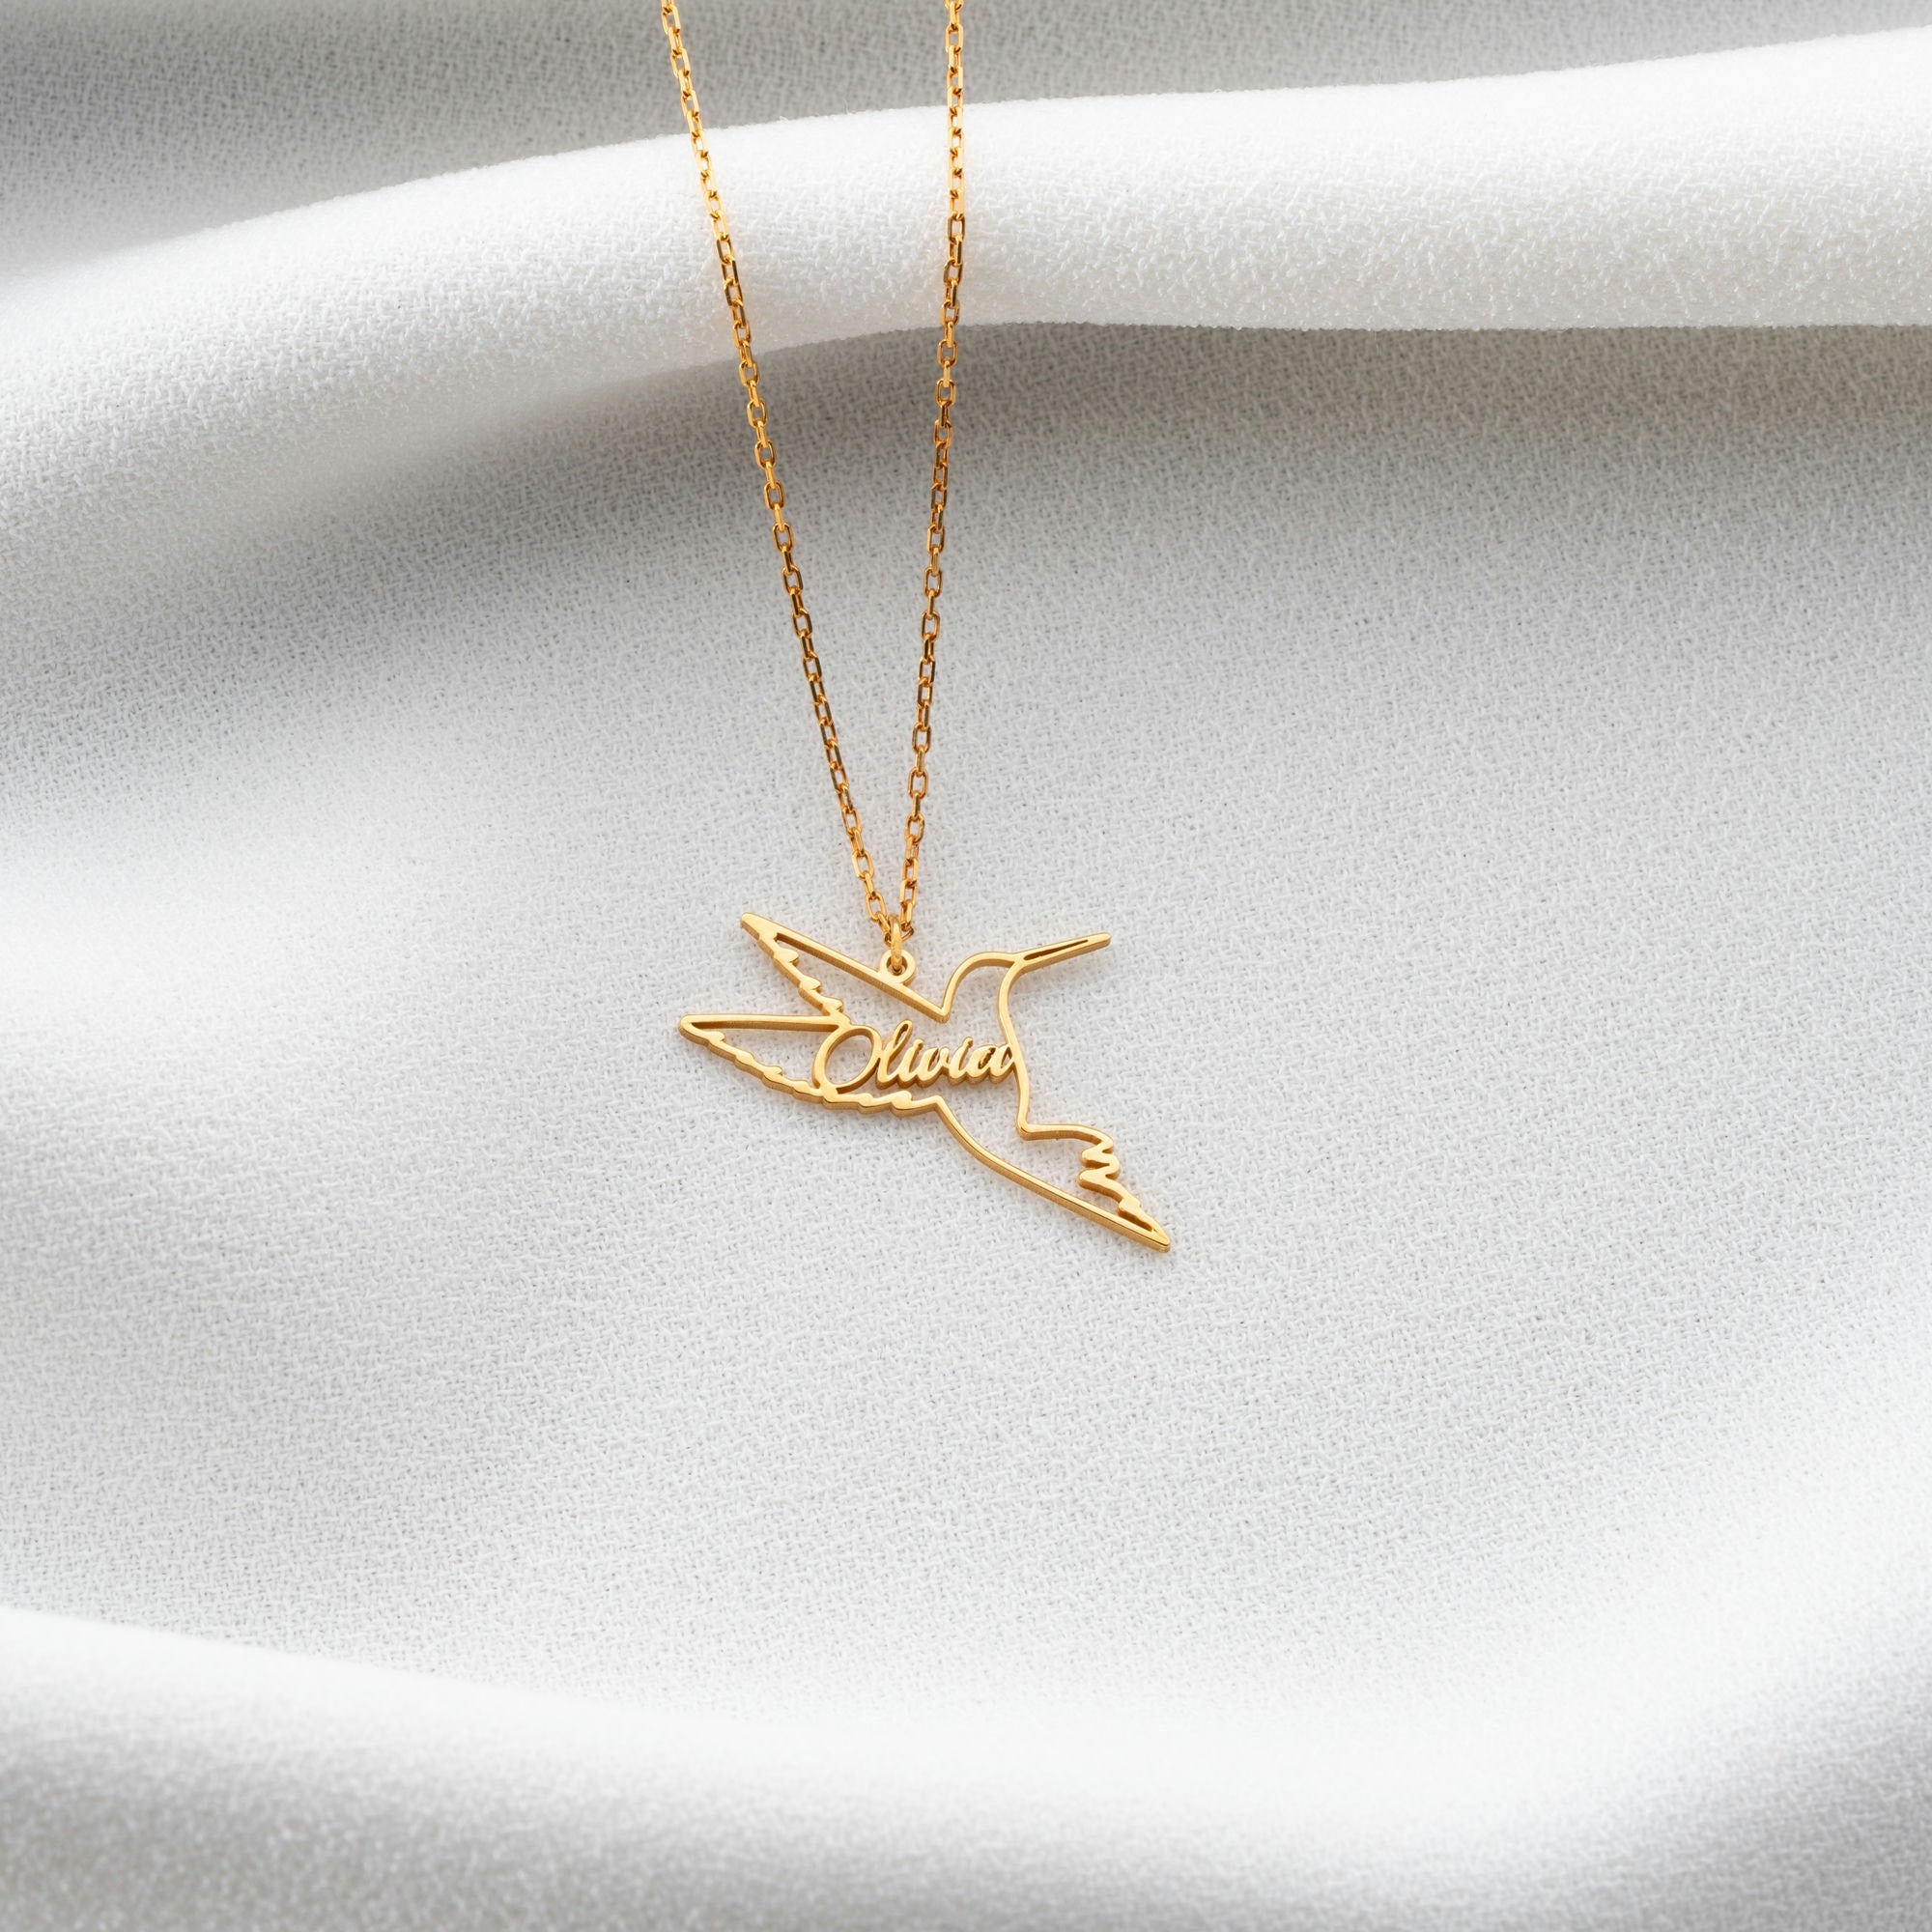 Hummingbird Necklace With Name